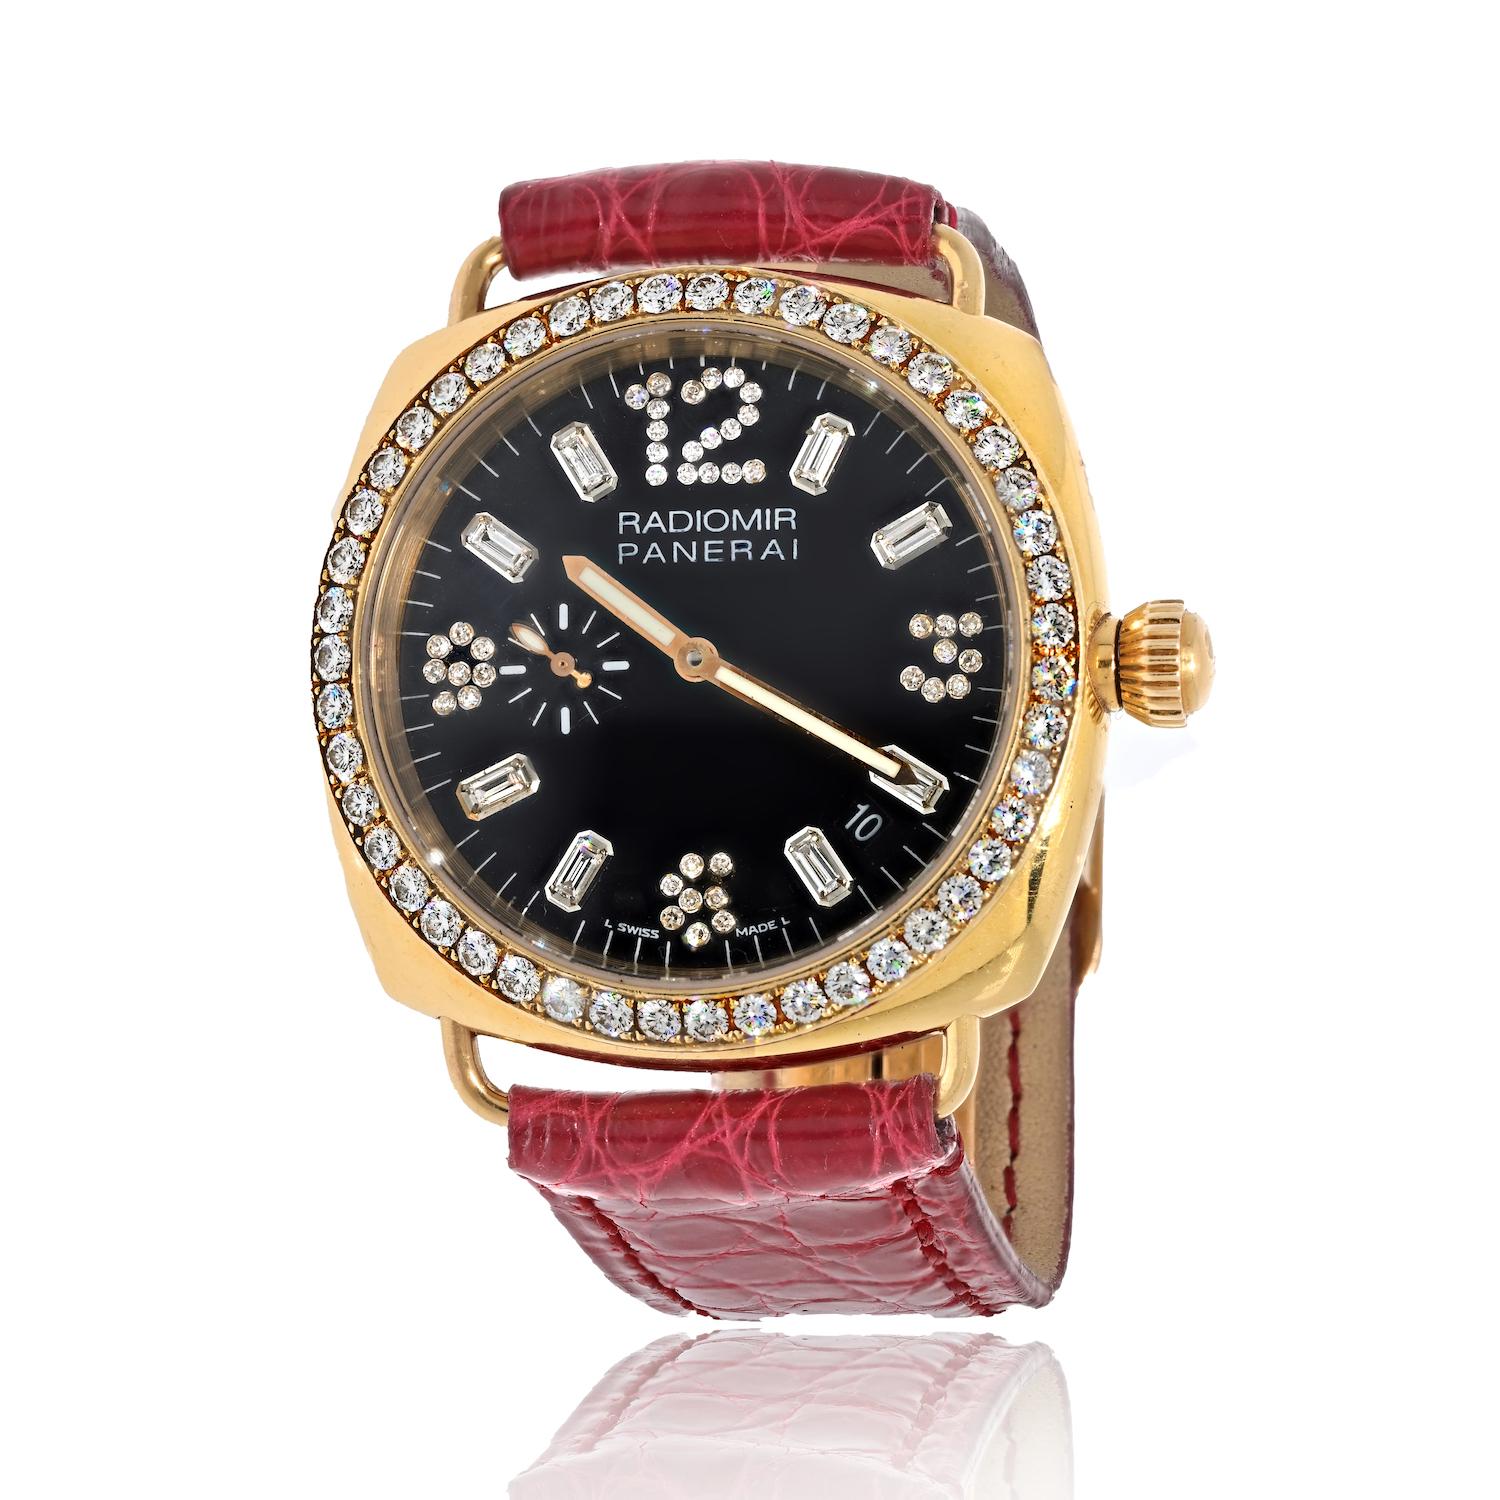 Indulge in the luxurious allure of the Panerai 18K Yellow Gold Luminor Radiomir Diamond Ladies Watch, a dazzling timepiece that epitomizes elegance and sophistication. This exquisite watch features a stunning 40mm case adorned with brilliant diamond